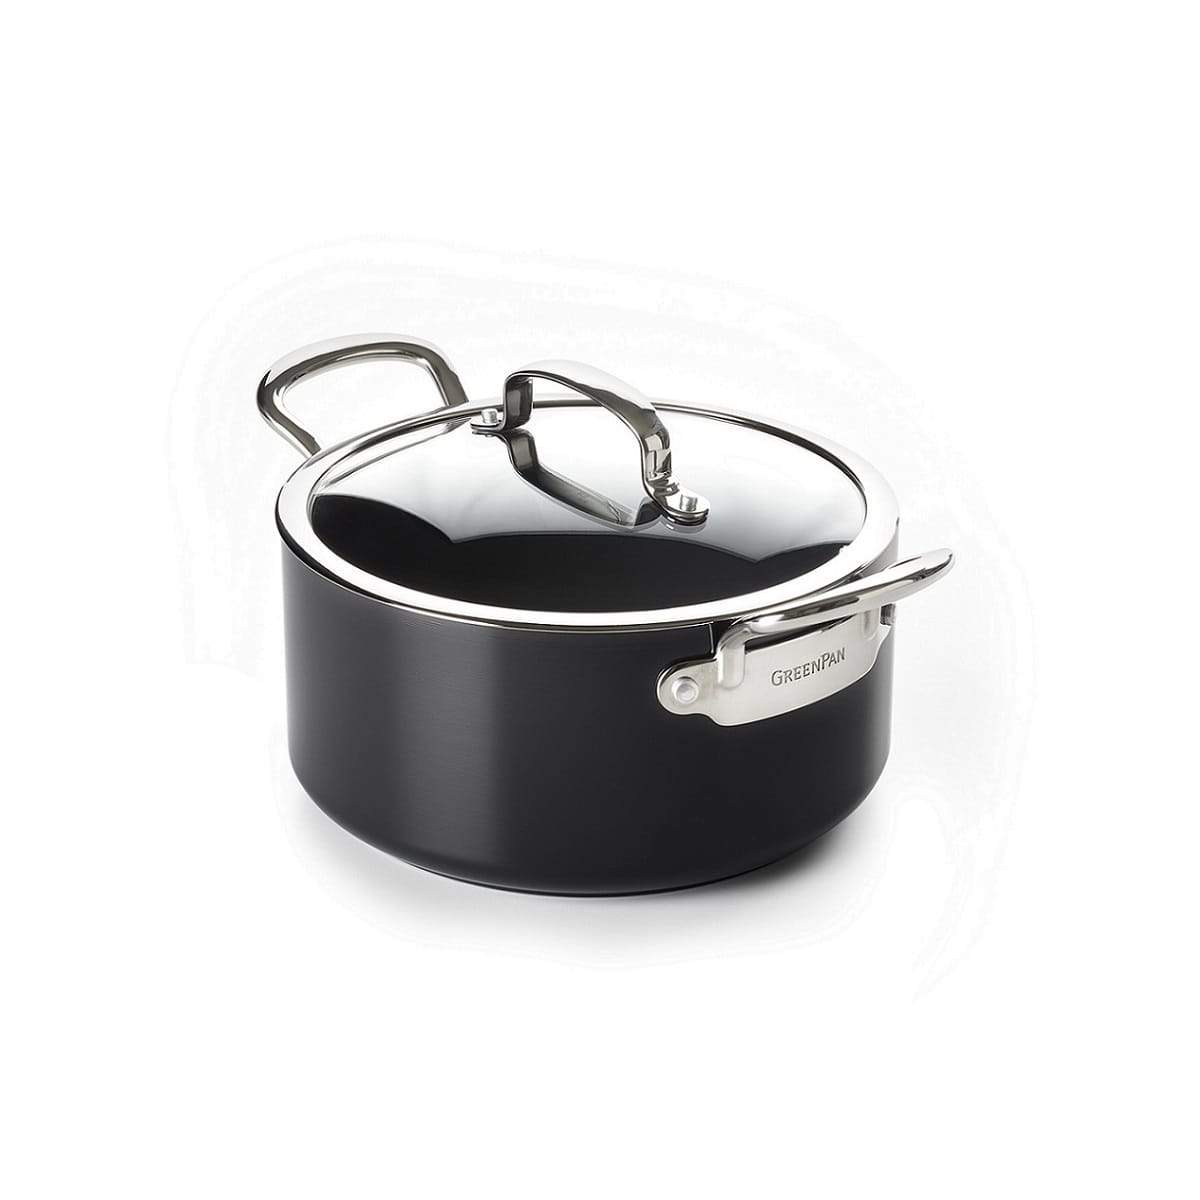 CW002204-002 - Barcelona Stock Pot with Lid, Black - 24cm - Product Image 1